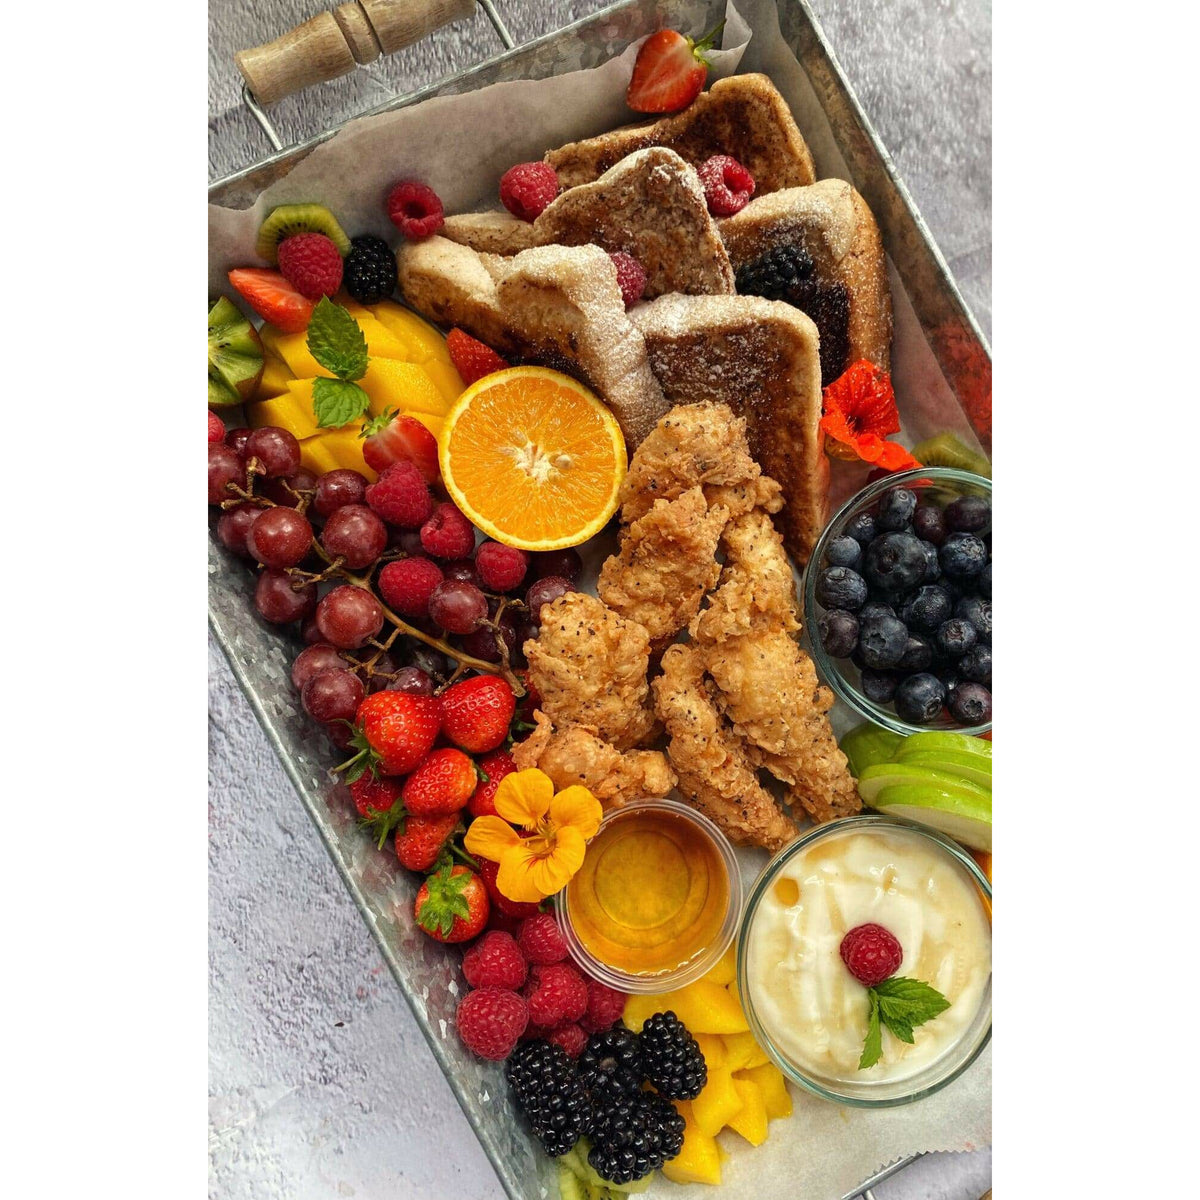 Large Breakfast Platter (Pick up and Local Delivery)